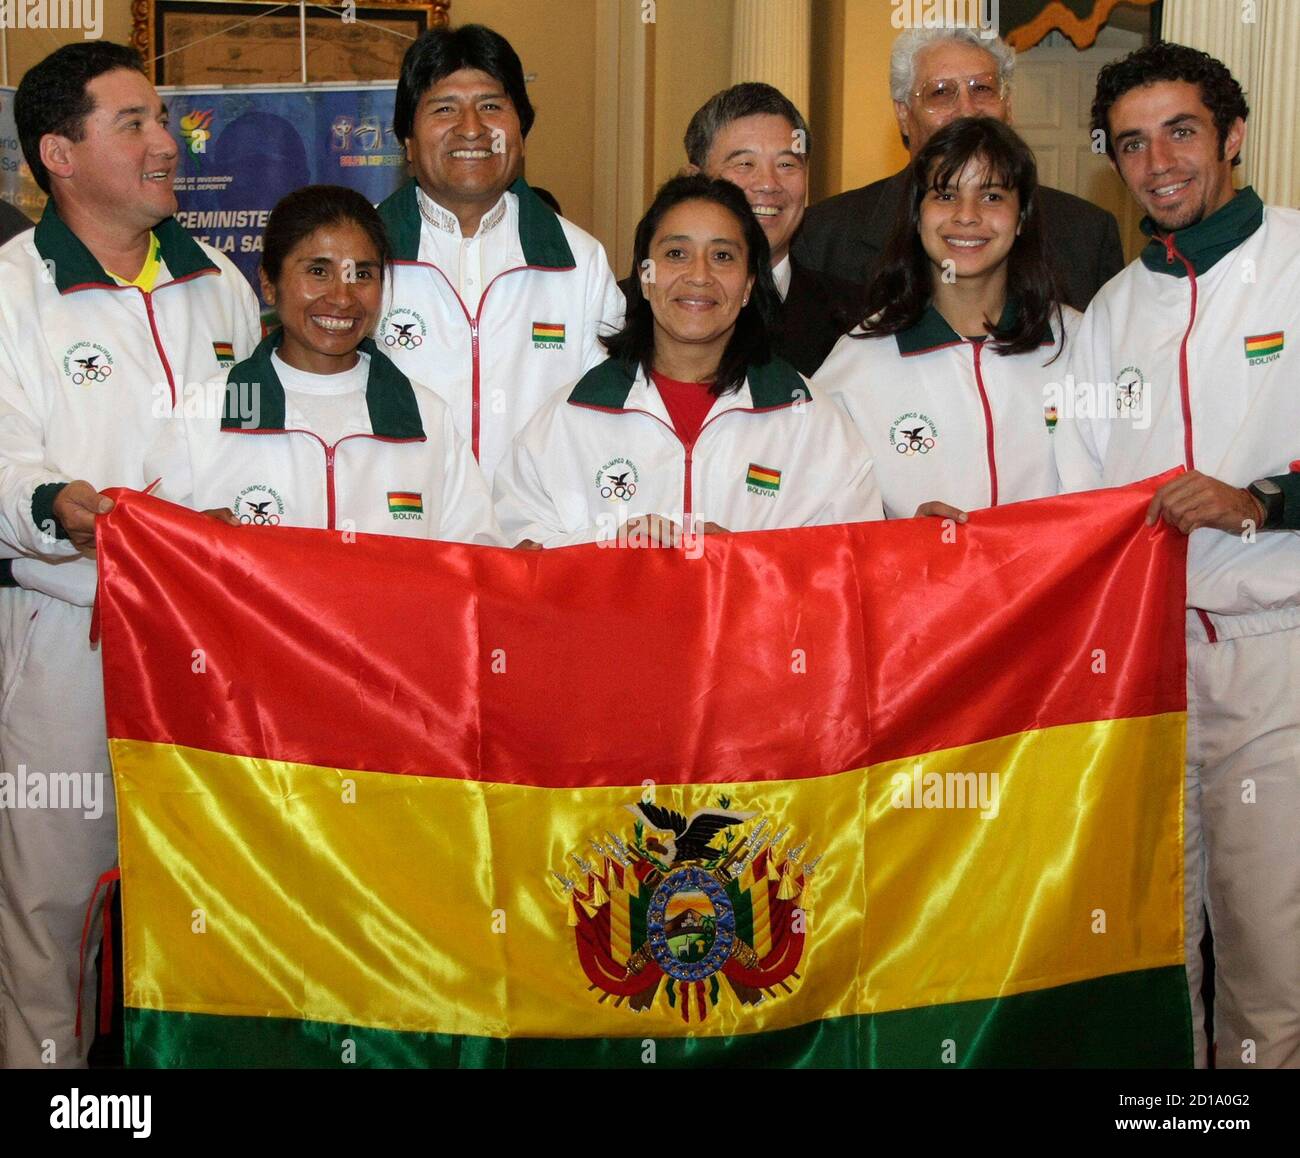 Members of the Bolivian Olympic team (L-R) Cesar Menacho taking part in sports shooting, Sonia Calisaya taking part in athletics, Maria Teresa Monasterios taking part in weight lifting, Karen Torrez taking part in swimming and Fradrique Iglesias taking part in athletics hold a national flag next to Bolivia's President Evo Morales (3rd L) pose at the presidential palace in La Paz July 28, 2008. REUTERS/Gaston Brito  (BOLIVIA)  (BEIJING OLYMPICS 2008 PREVIEW) Stock Photo